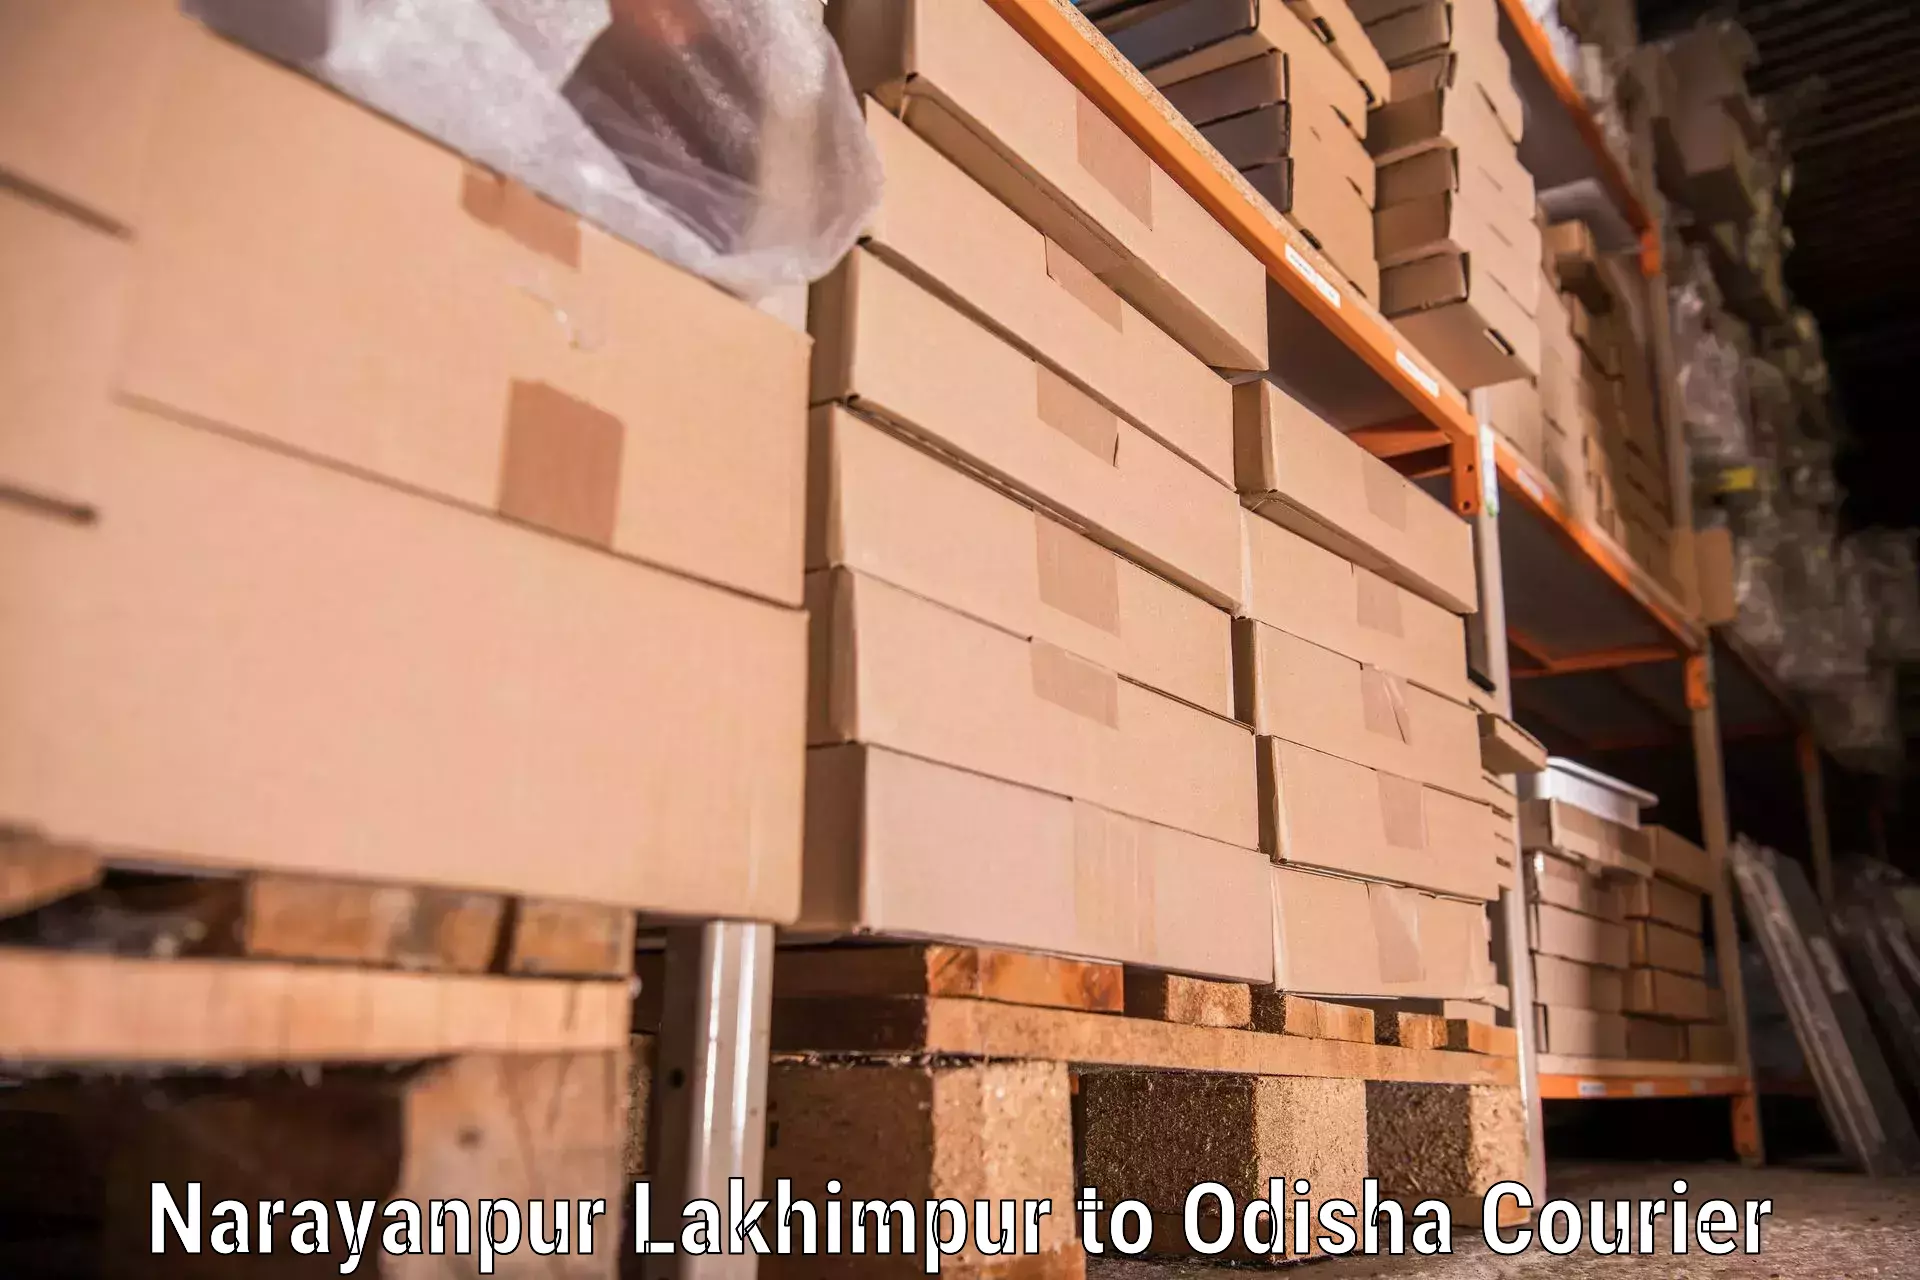 Quality relocation services in Narayanpur Lakhimpur to Bhubaneswar